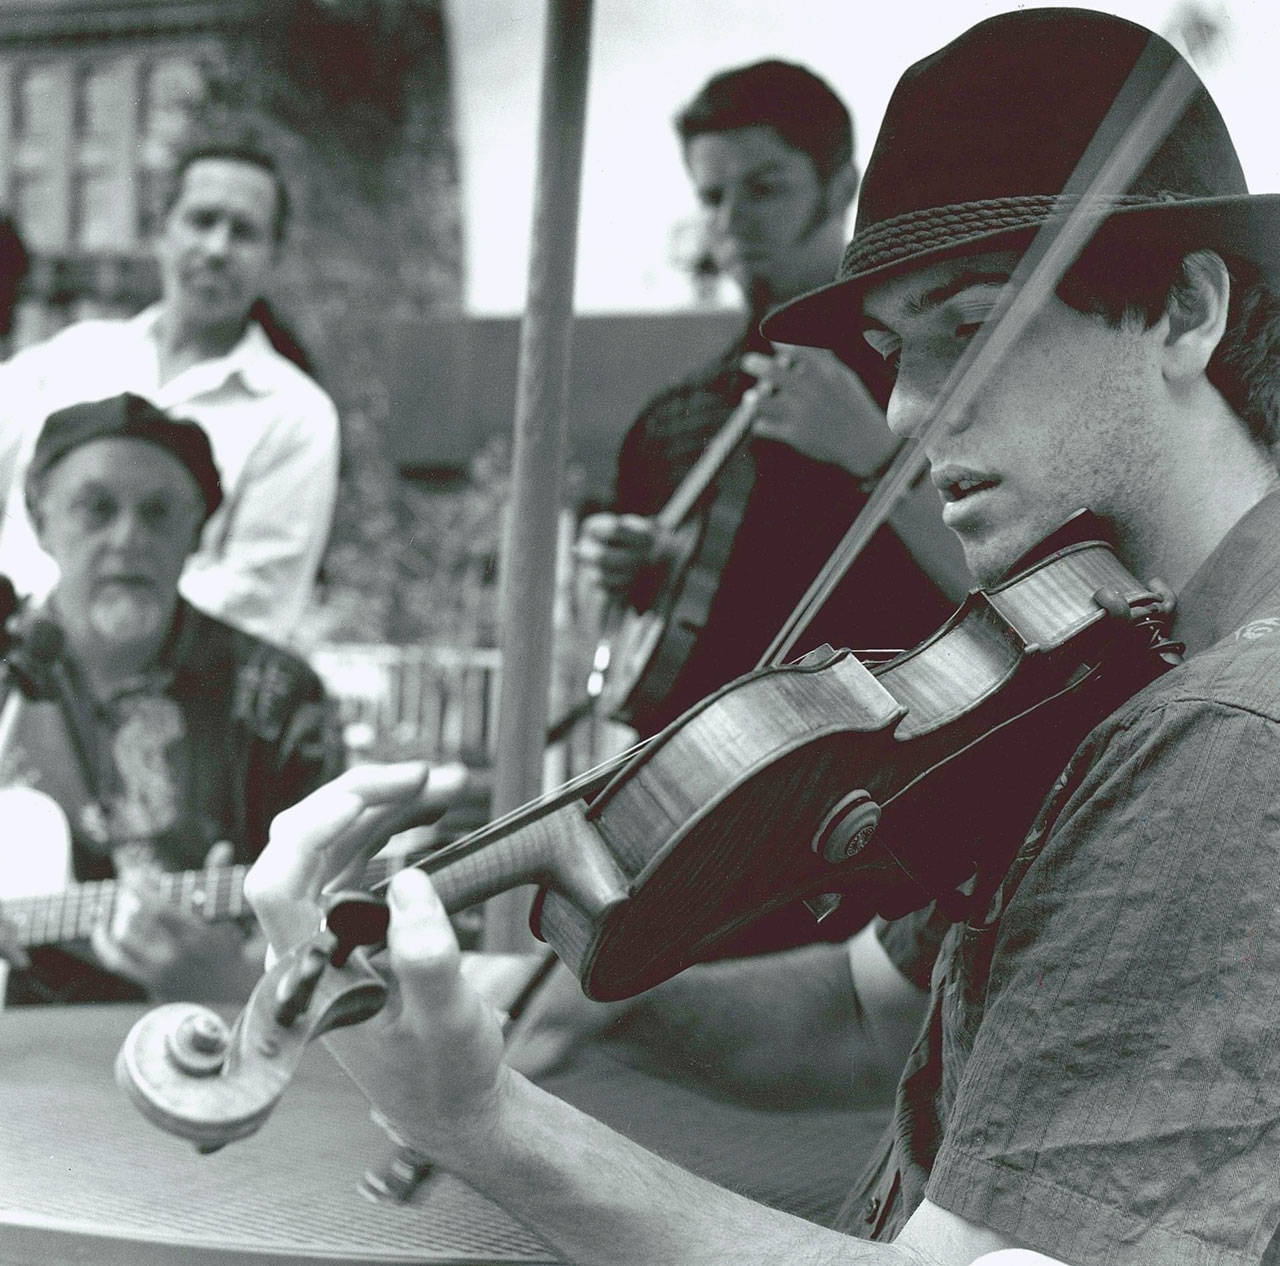 Free outdoor Gypsy jazz concert in Winslow Friday